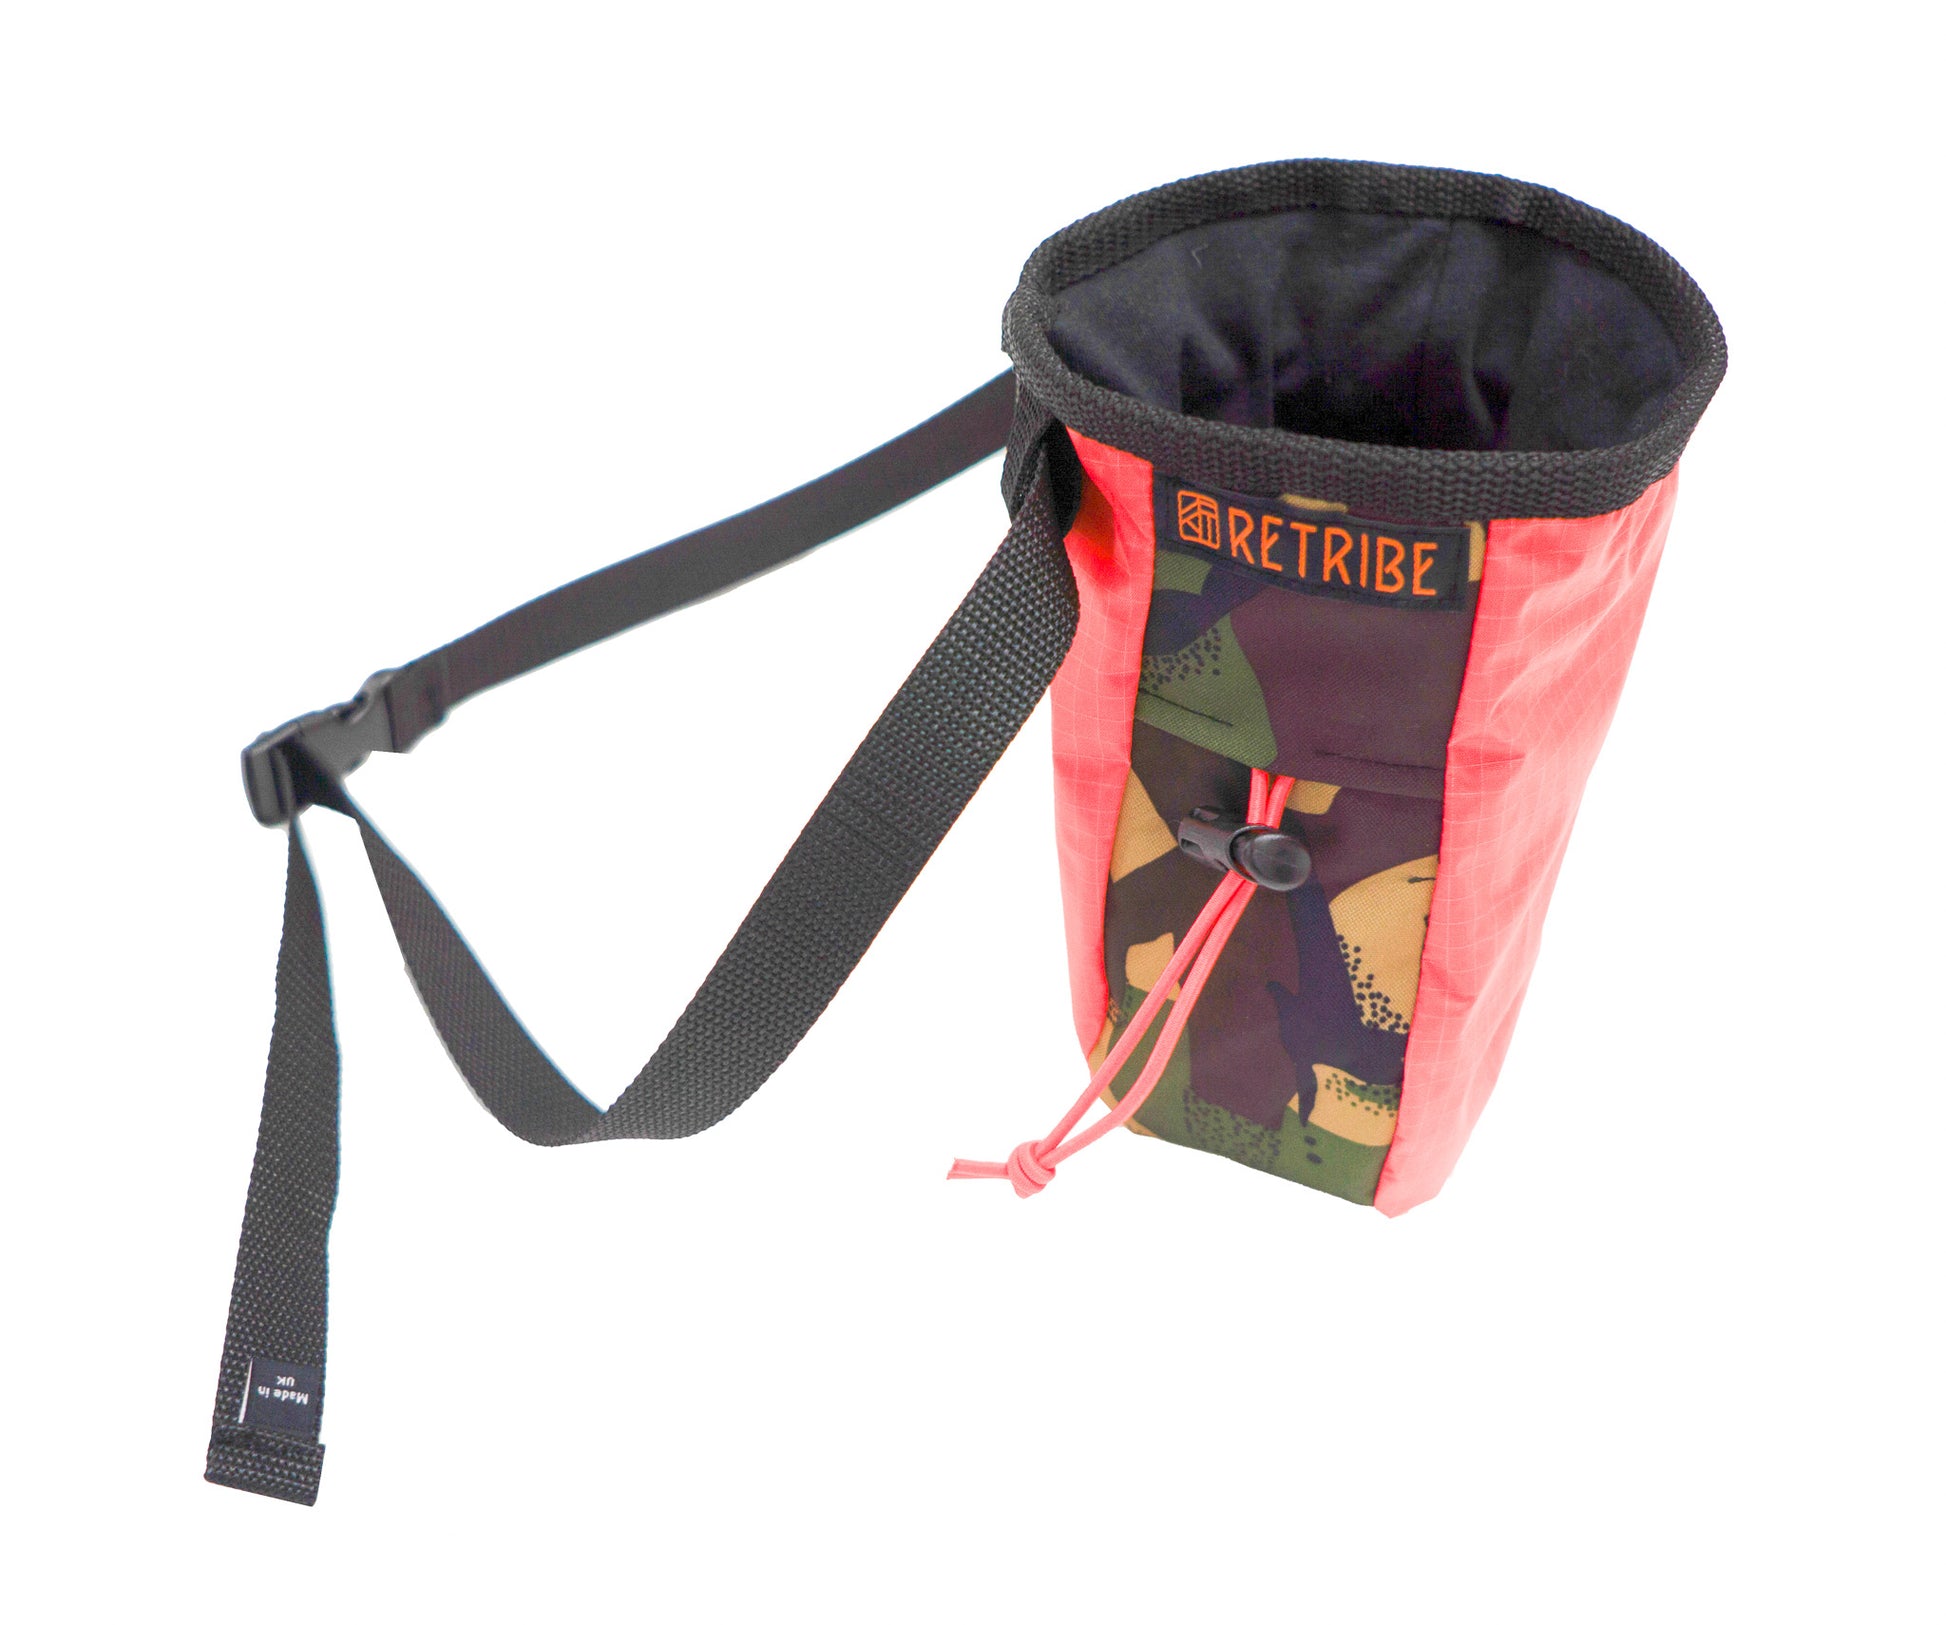 Chalk bag, made from salvaged Tents. With sides made from salvaged pink deadstock fabric. With woven a Retribe badge on the side. Black webbing waist strap with made in the UK label